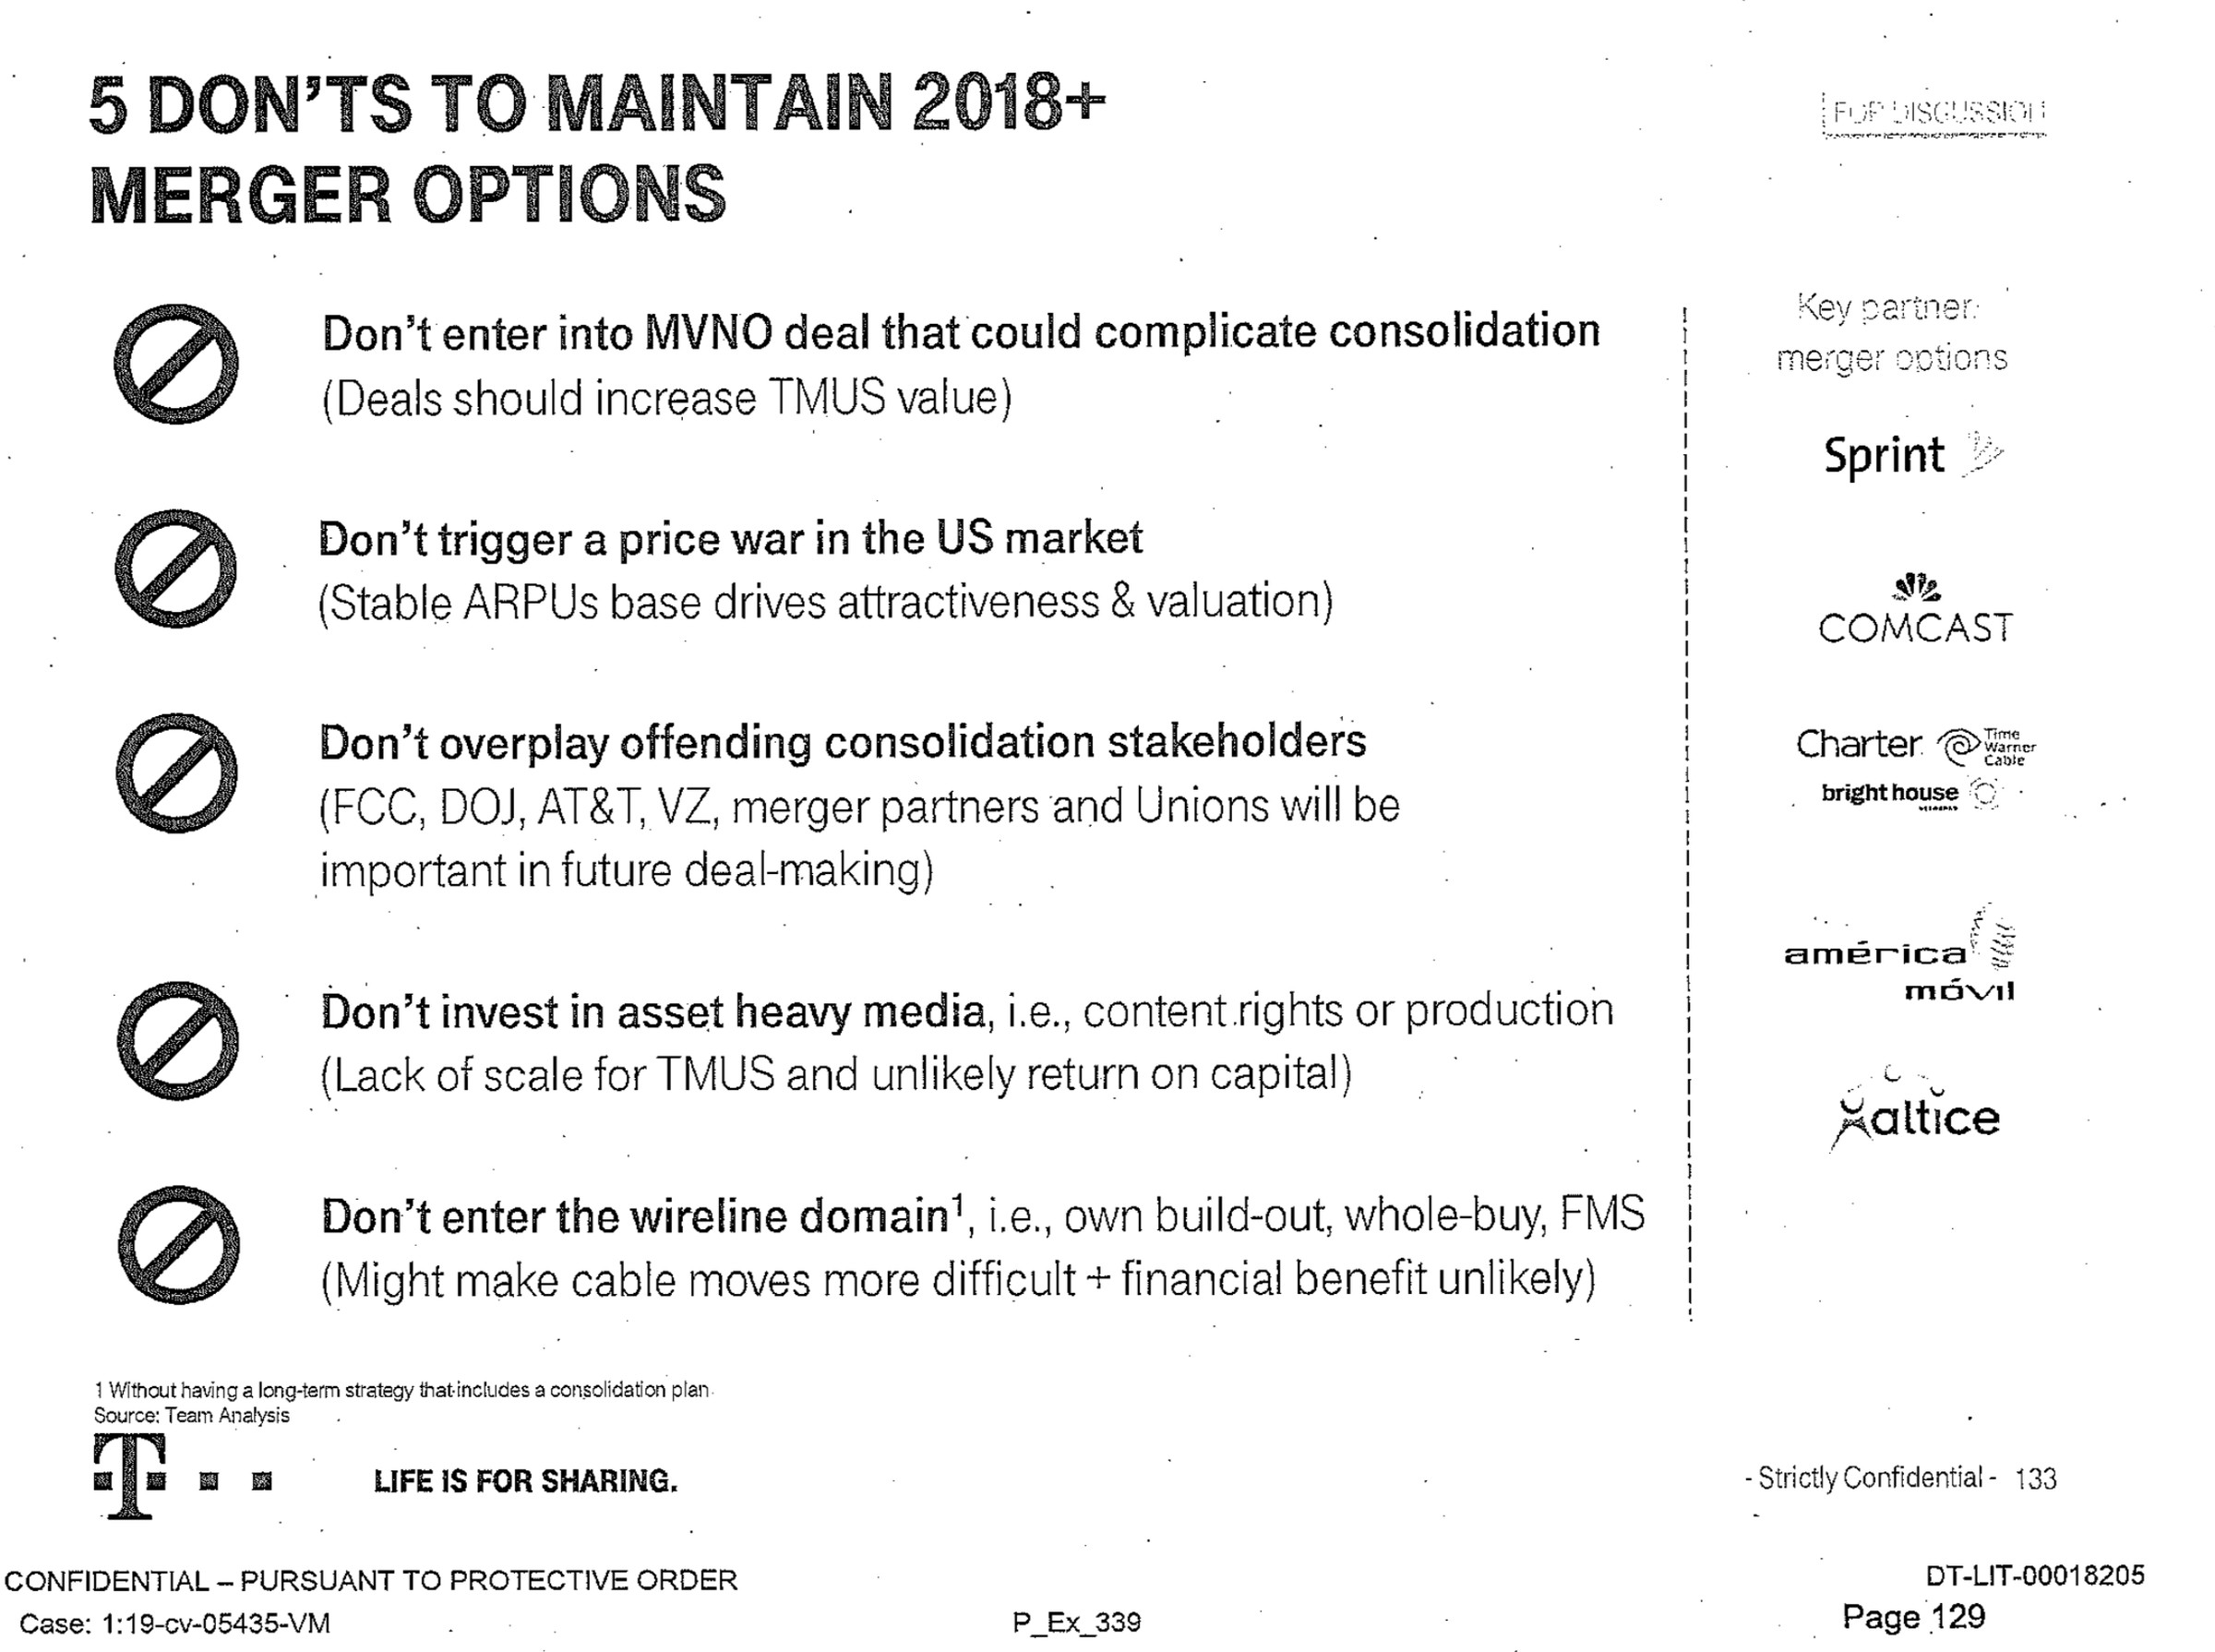 T-Mobile lists “Don’t trigger a price war in the US market” as a key point in maintaining merger options.